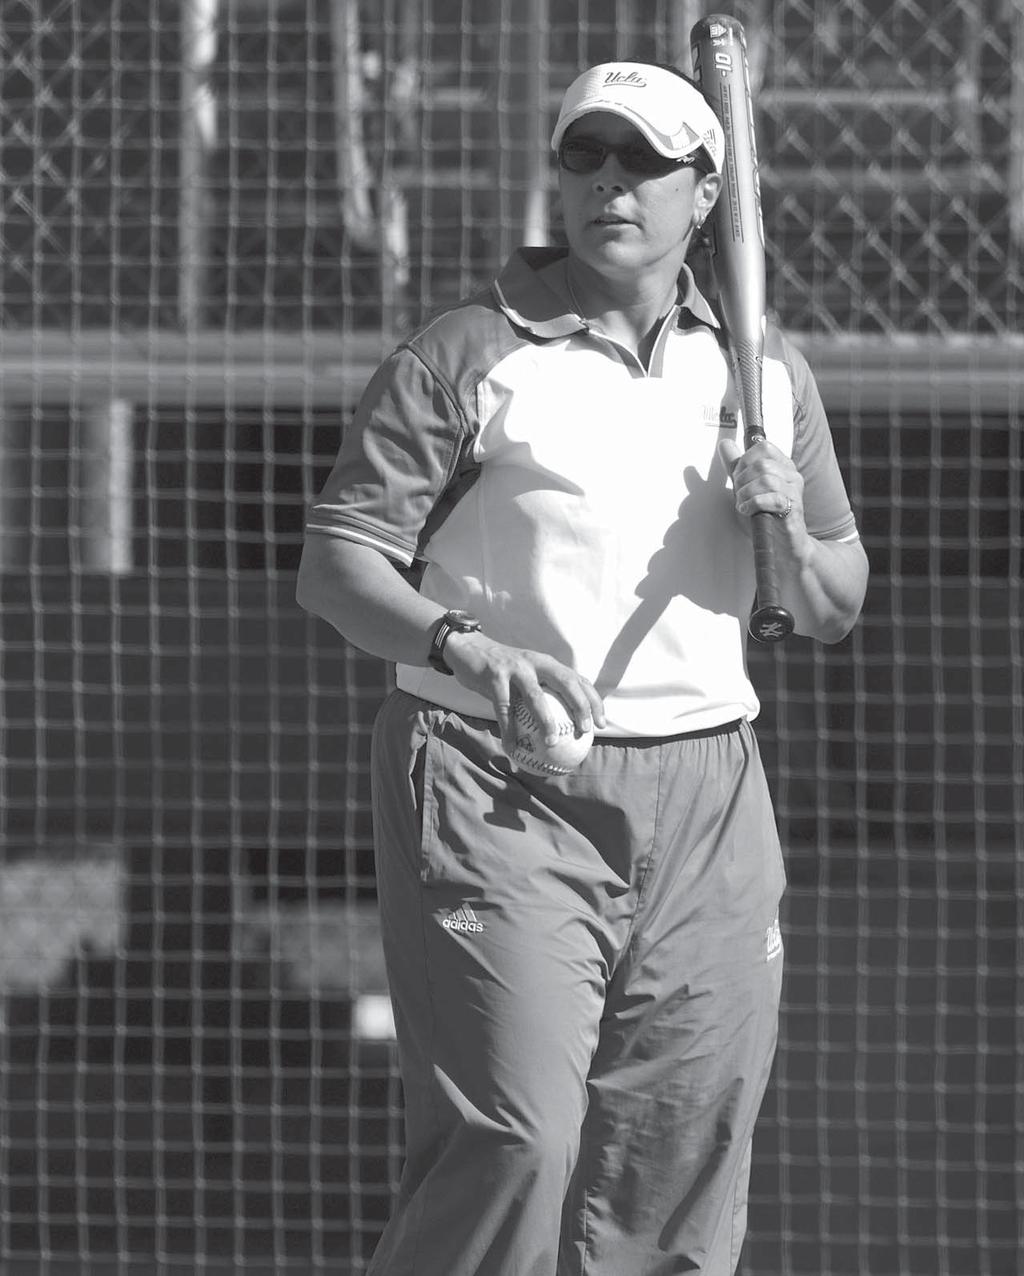 Assistant coach Gina Vecchione begins her ninth season as a member of the UCLA coaching staff in 2008, continuing her work with the Bruin outfi elders and hitters.